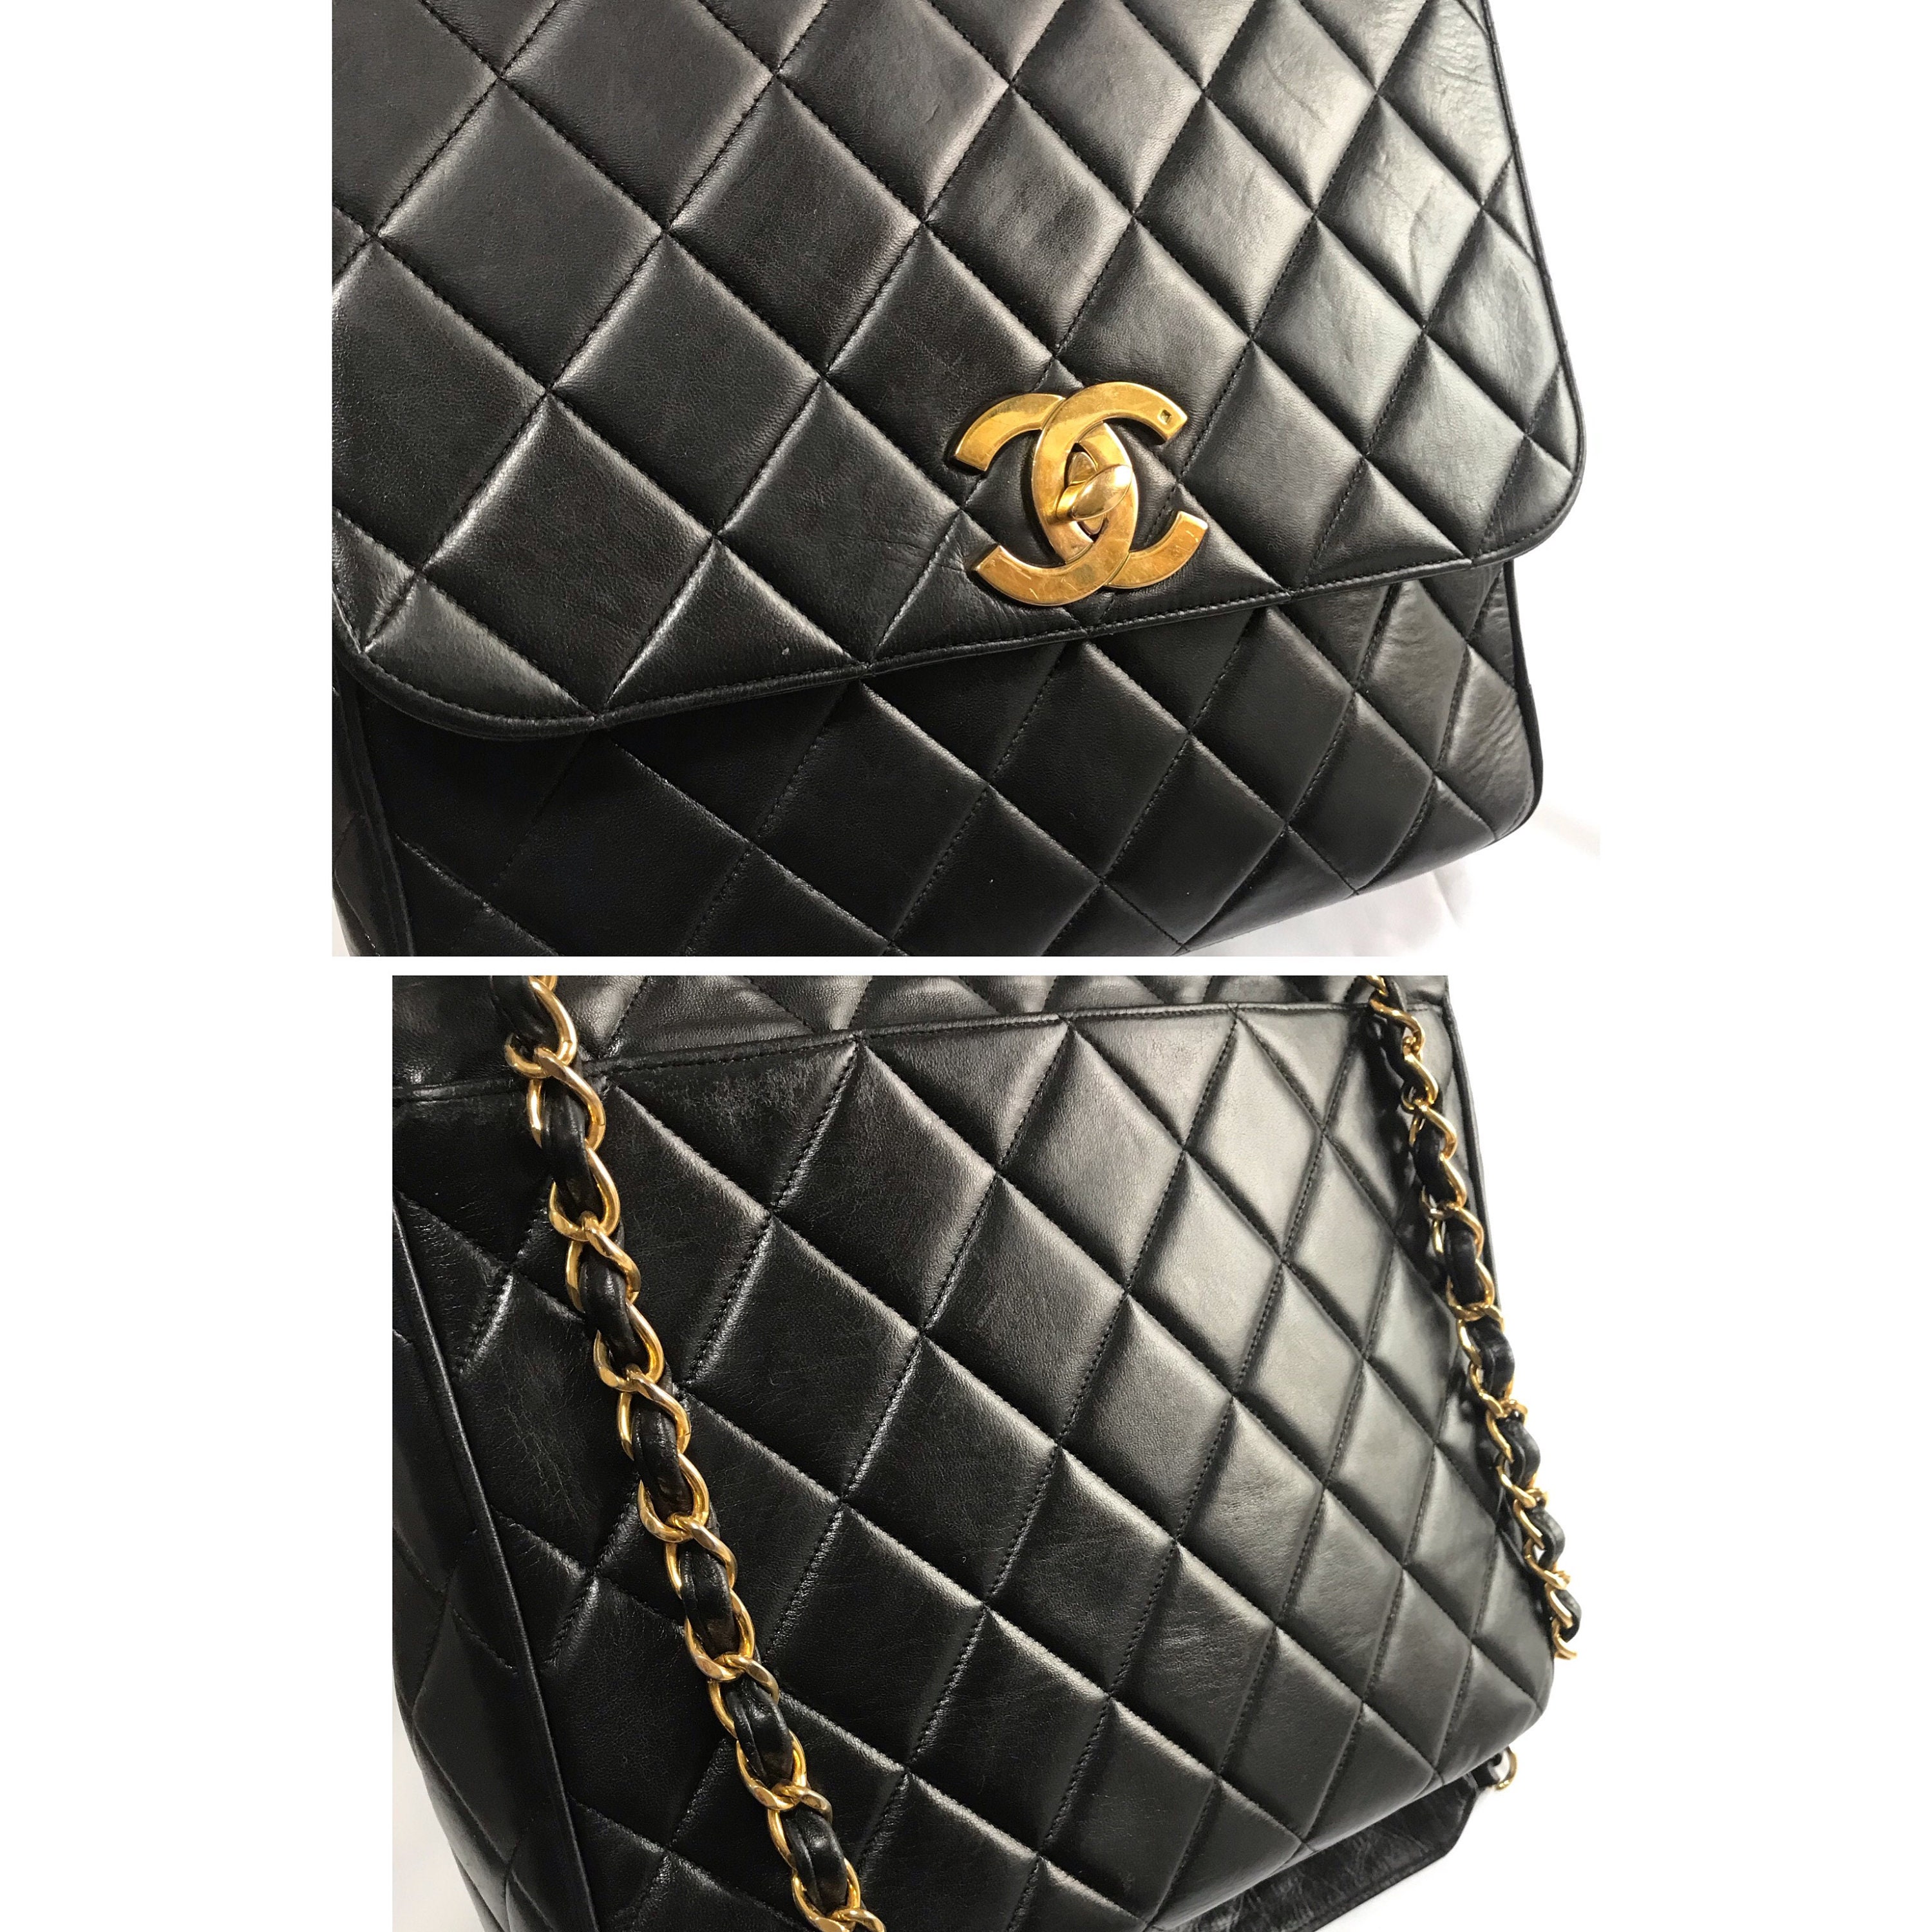 2014 New Chanel Black Caviar Medium Classic 2.55 Double Flap Bag ~SOLD OUT  everywhere! - Mrs Vintage - Selling Vintage Wedding Lace Dress / Gowns &  Accessories from 1920s – 1990s. And